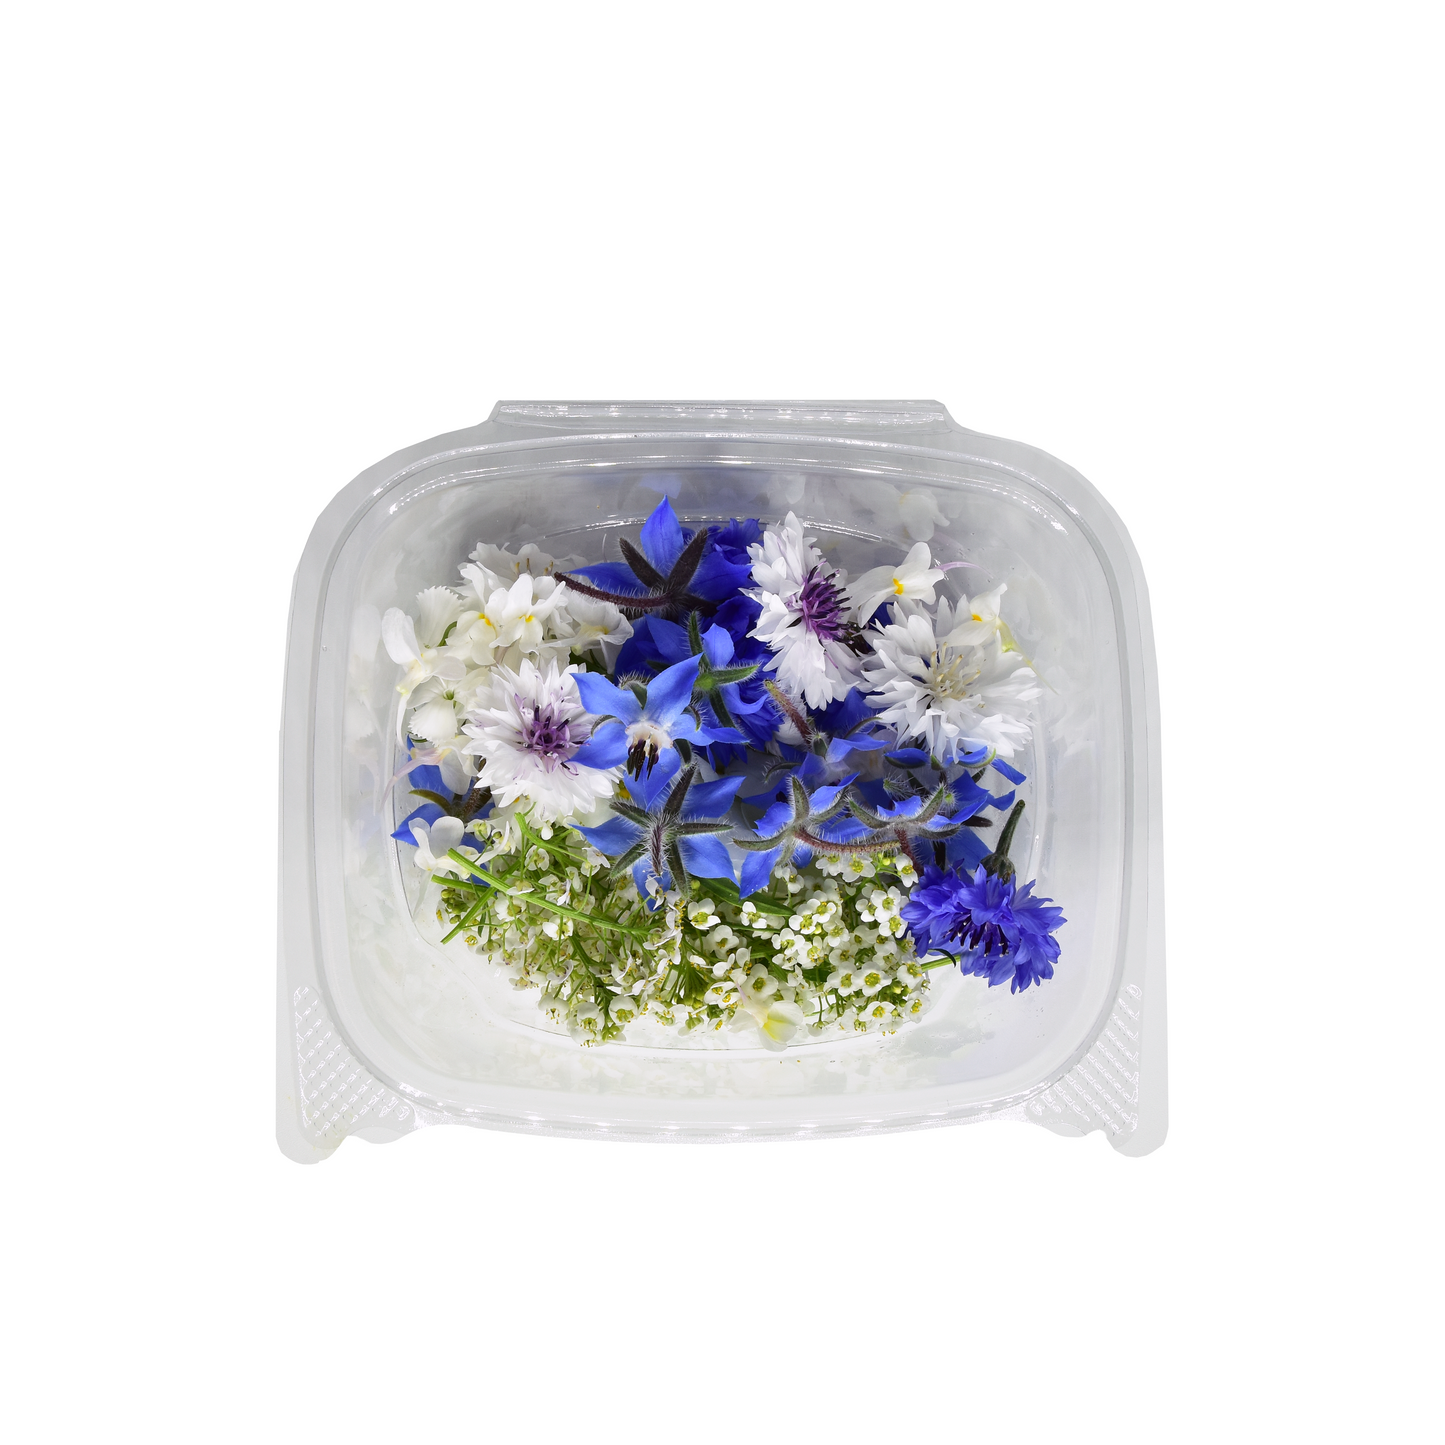 [NEW] Colour Collection - Edible Flowers Mix Bloom Box